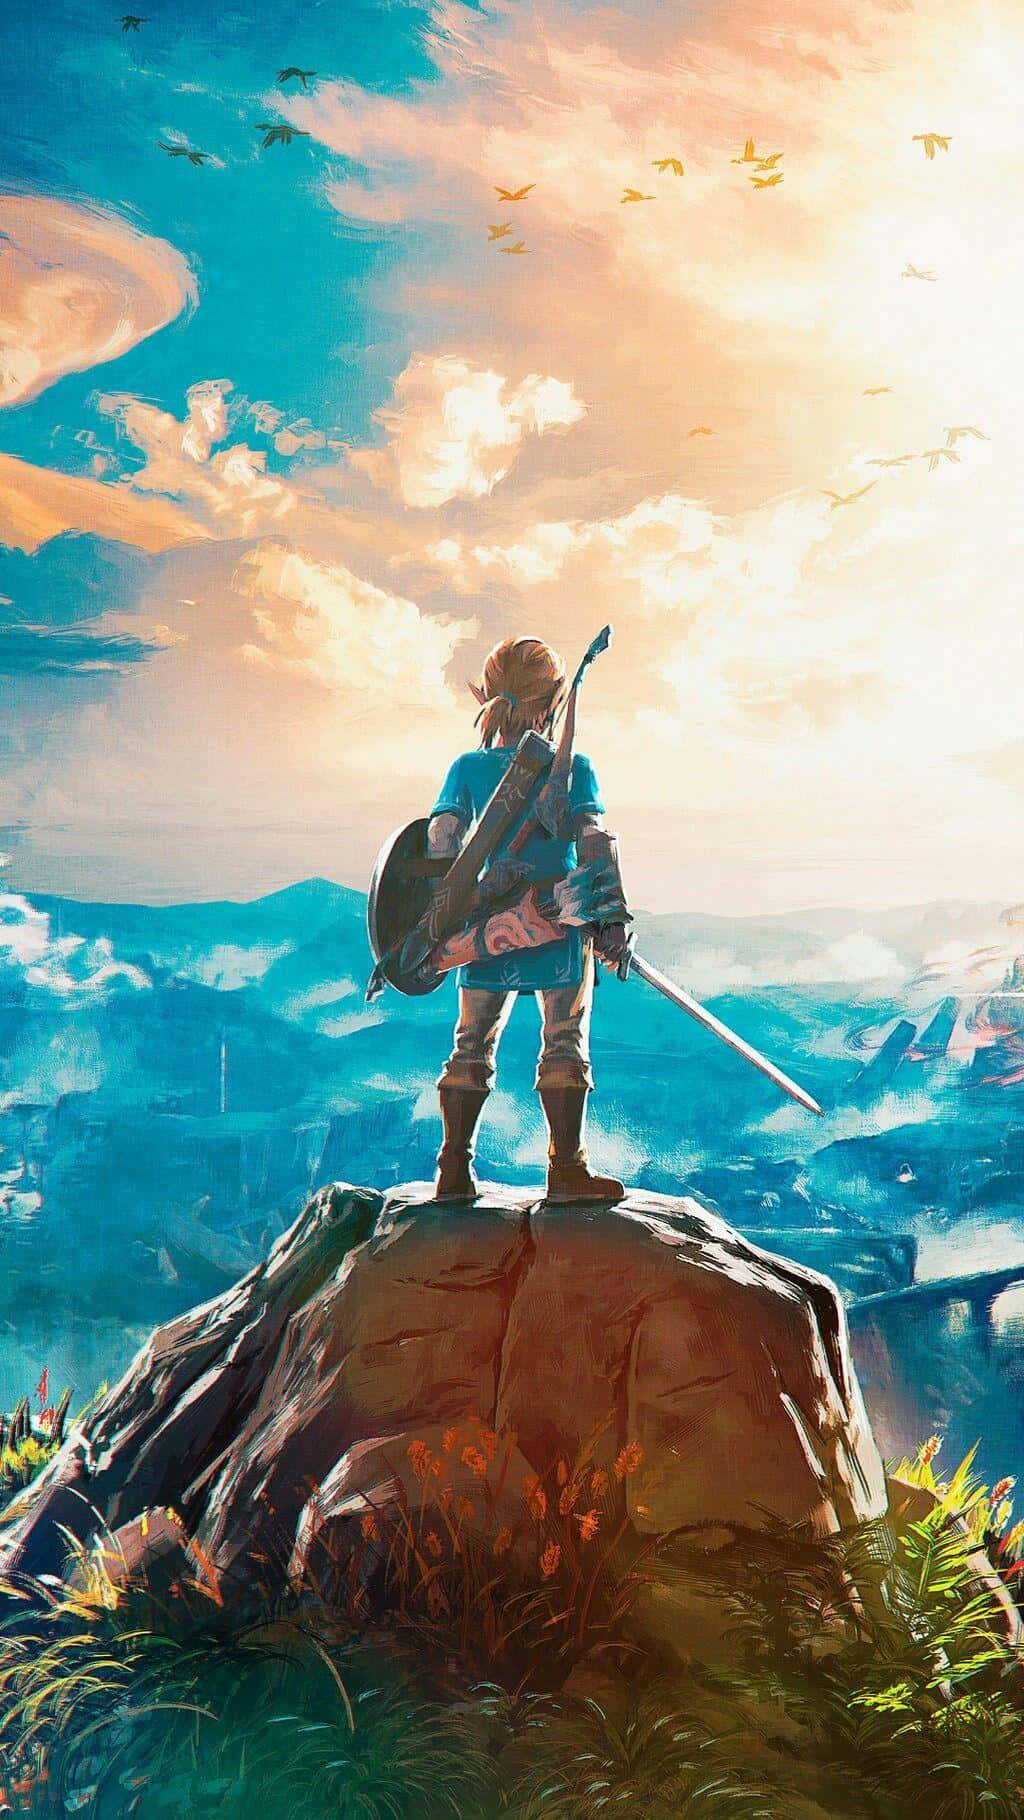 “Relive the Legend of Zelda with this iPhone” Wallpaper